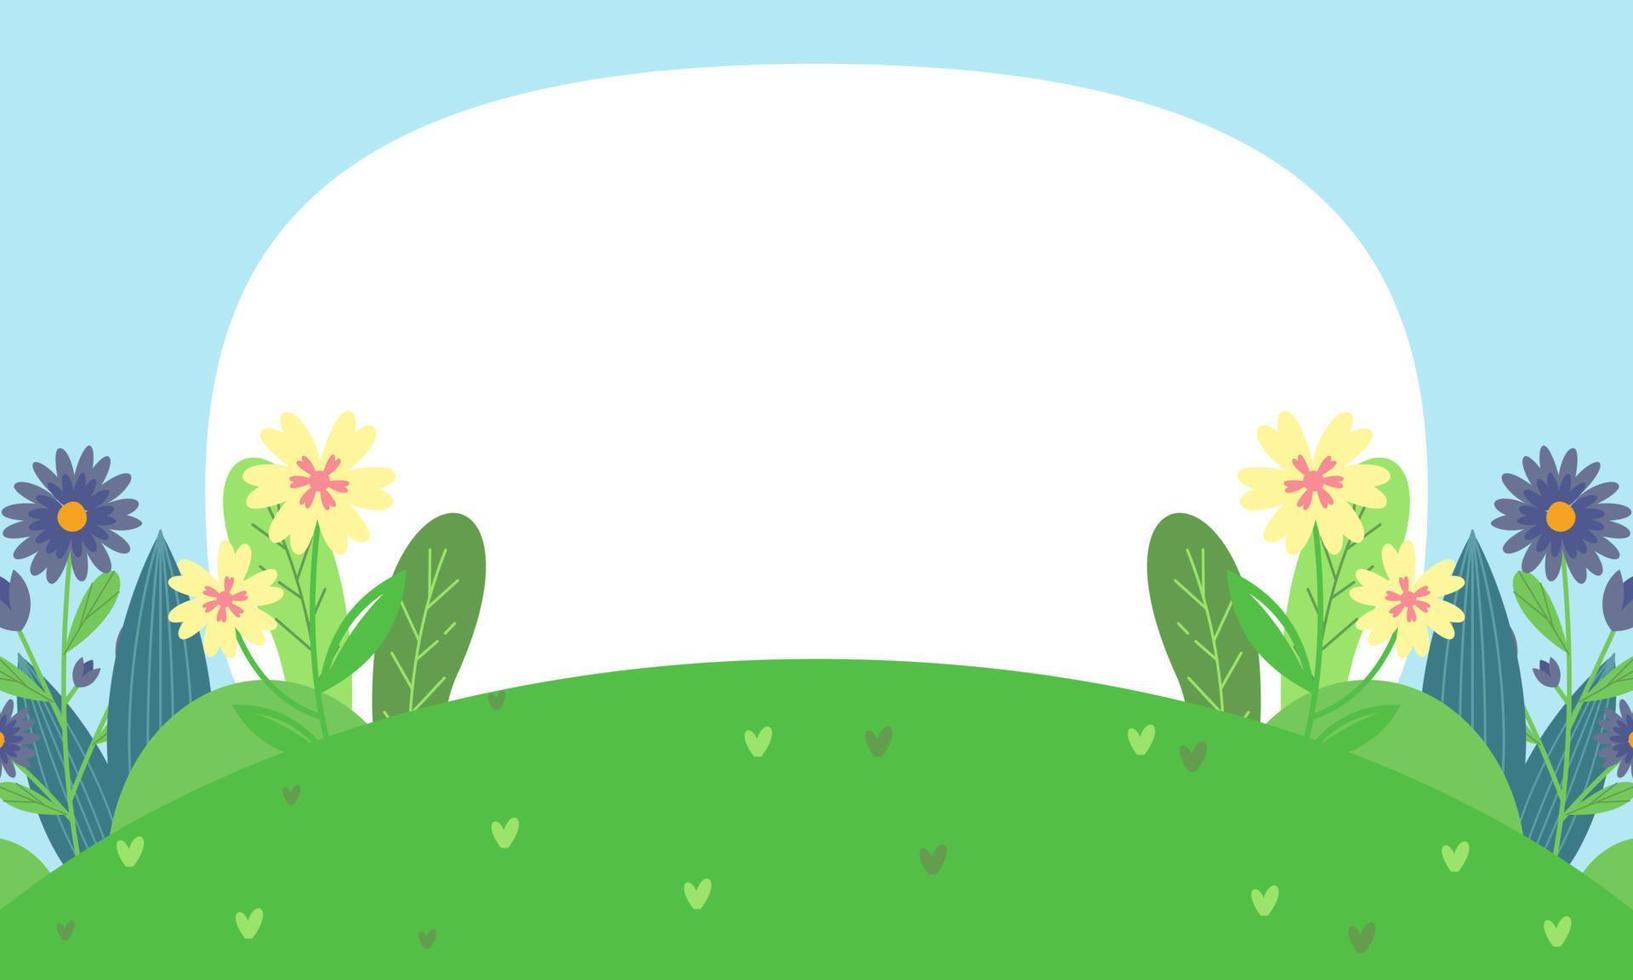 Nature Background with Flowers in Copy Space vector